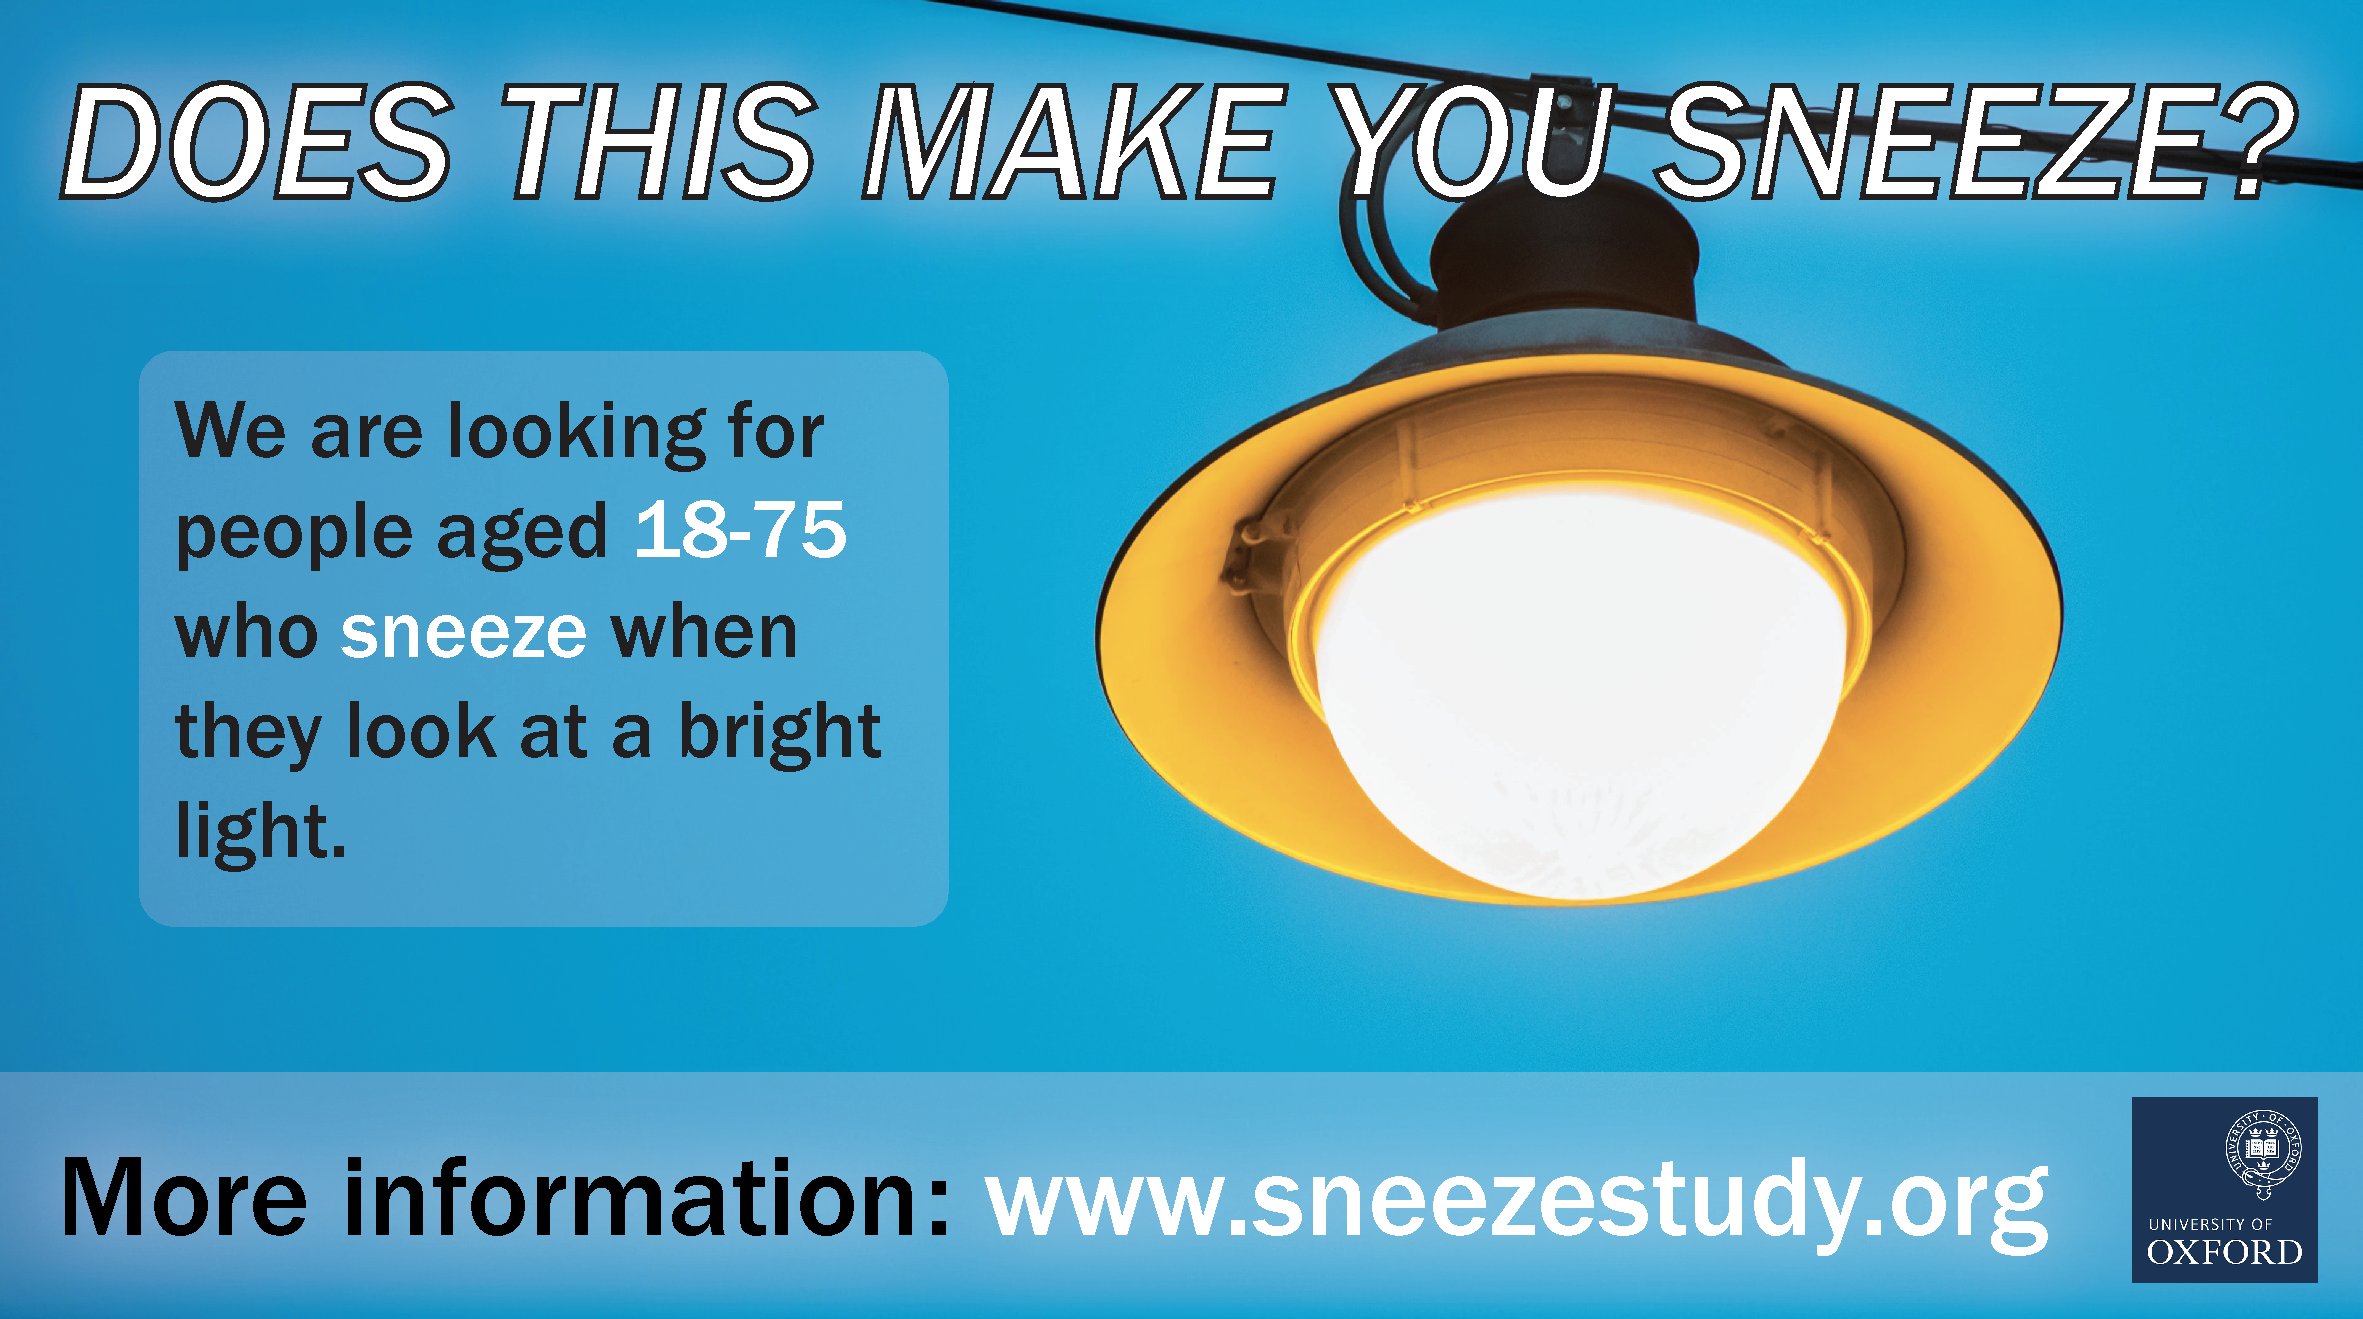 Manuel Spitschan PhD Twitter: you sneeze when you look at a bright light? We are currently recruiting volunteers (aged 18-75 years) to participate in an online study on sneezing in